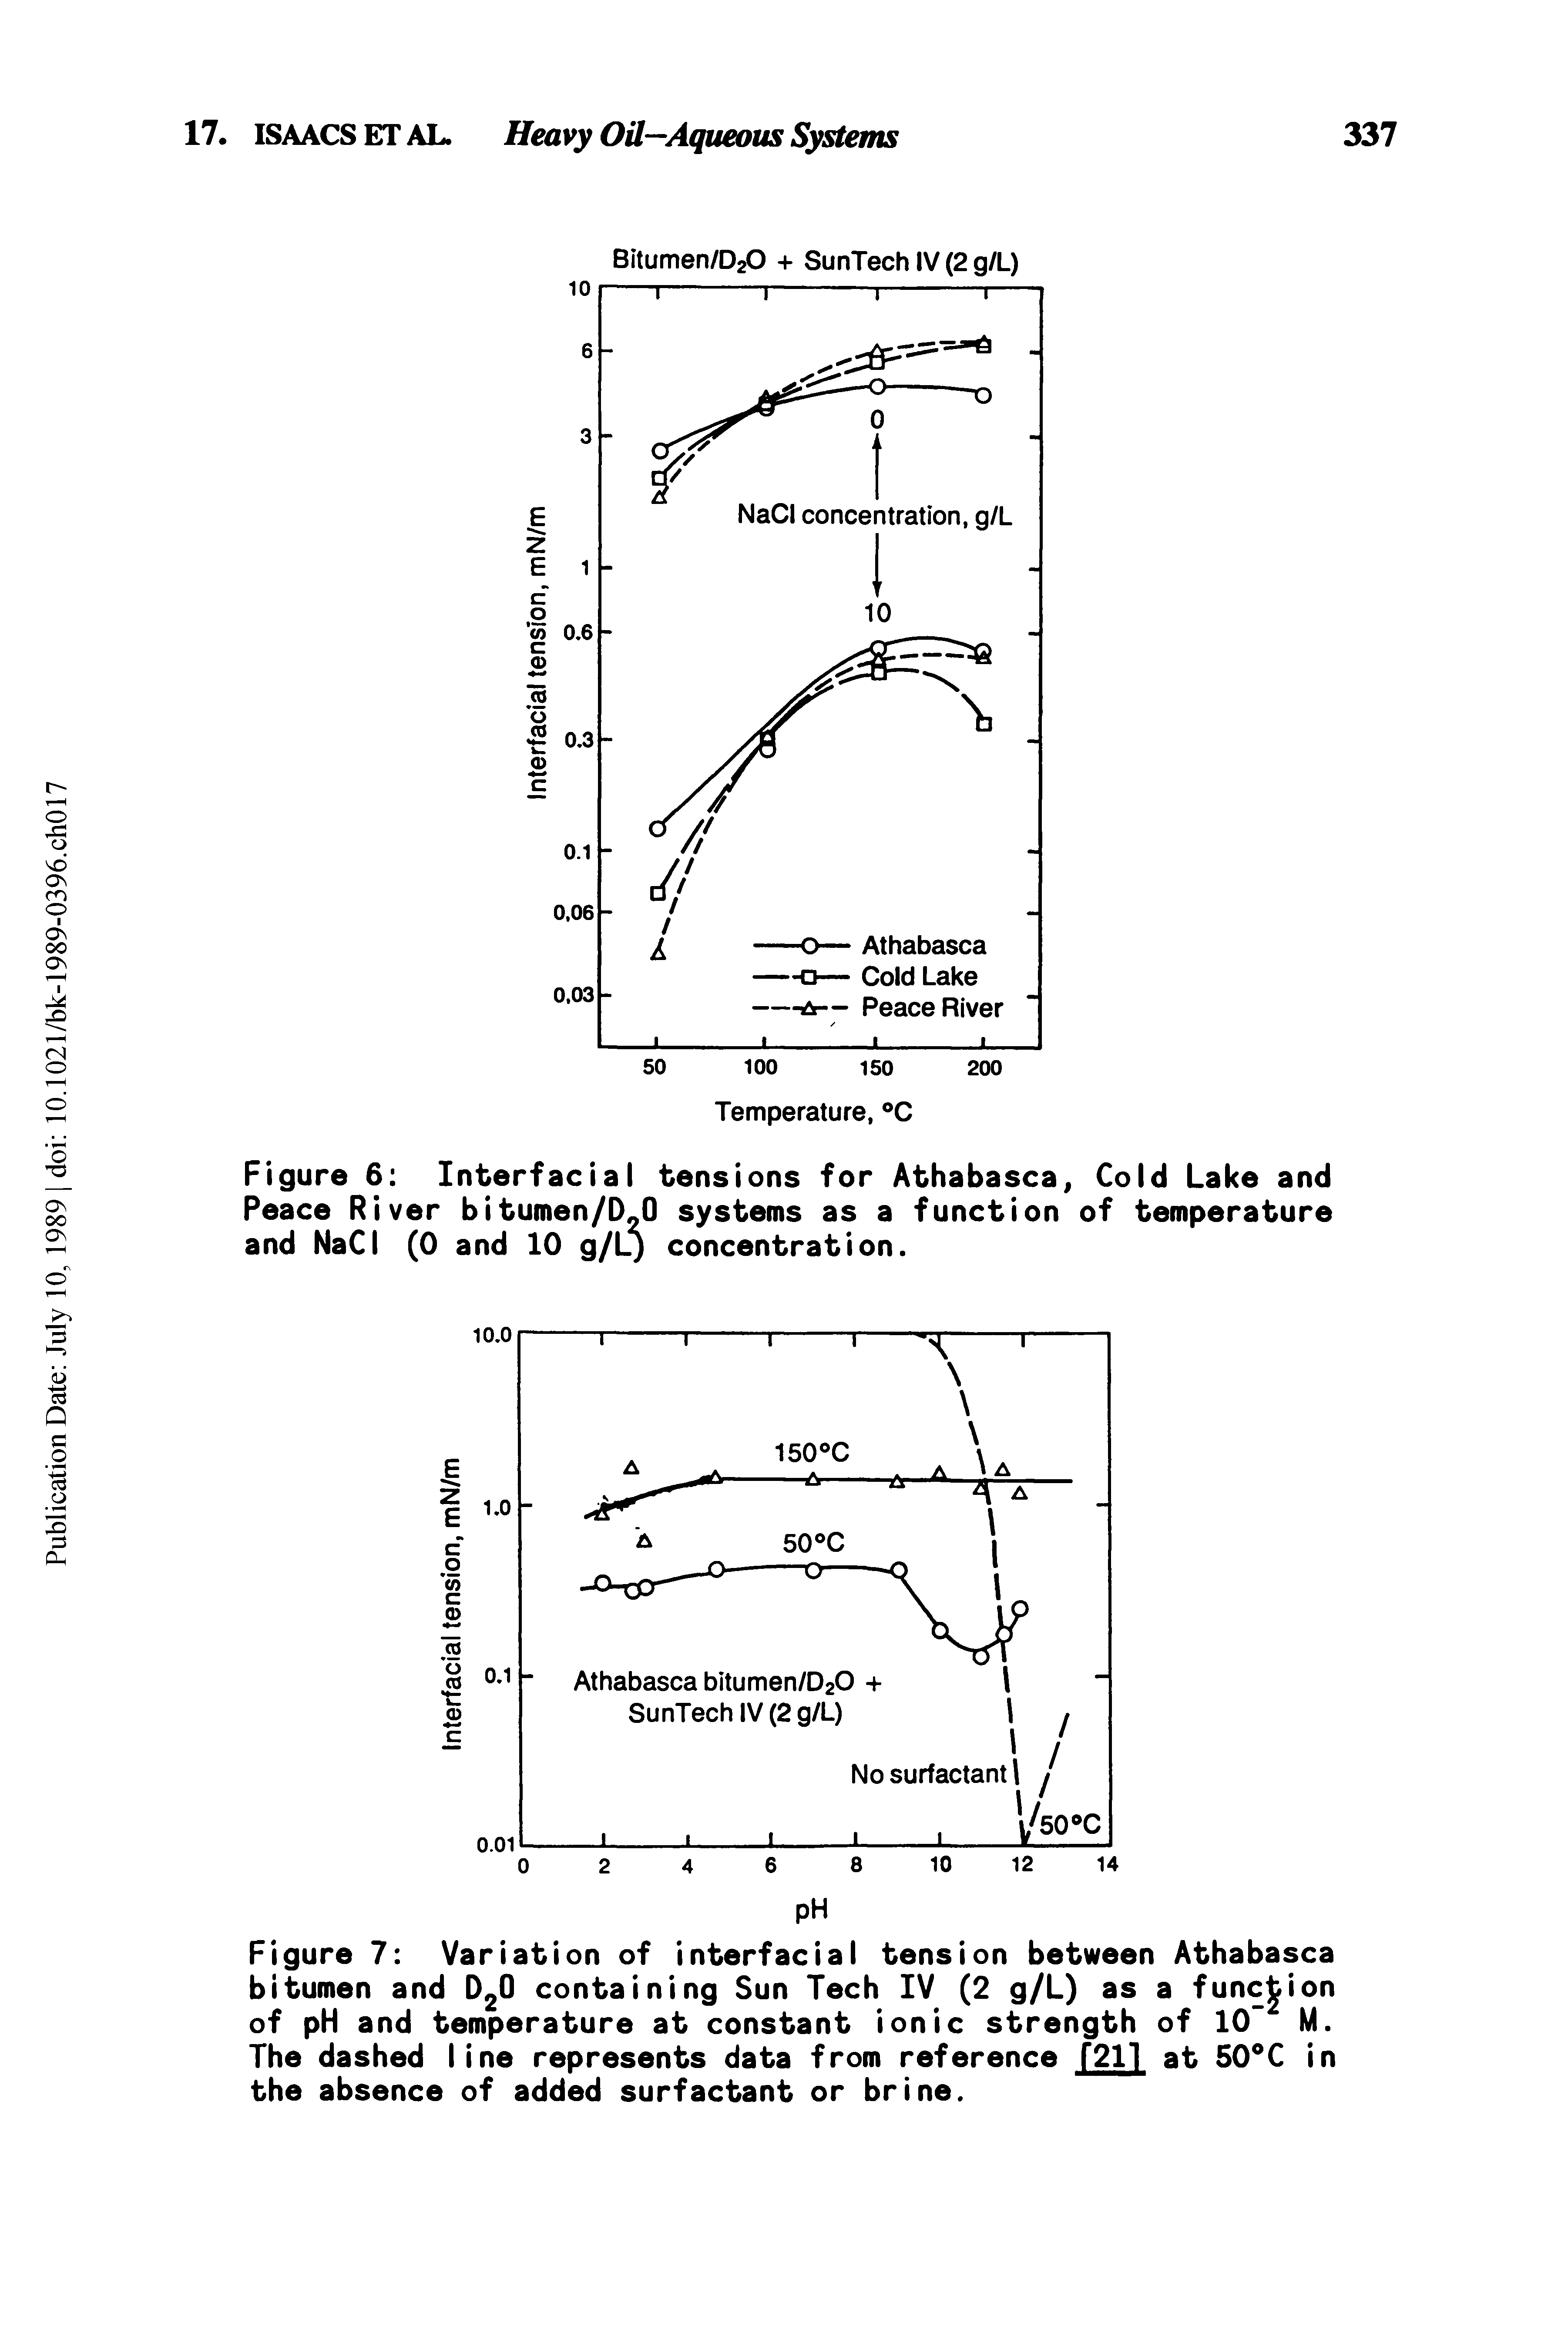 Figure 7 Variation of interfacial tension between Athabasca bitumen and D20 containing Sun Tech IV (2 g/L) as a function of pH and temperature at constant ionic strength of 10 M. The dashed line represents data from reference T211 at 50 C in the absence of added surfactant or brine.